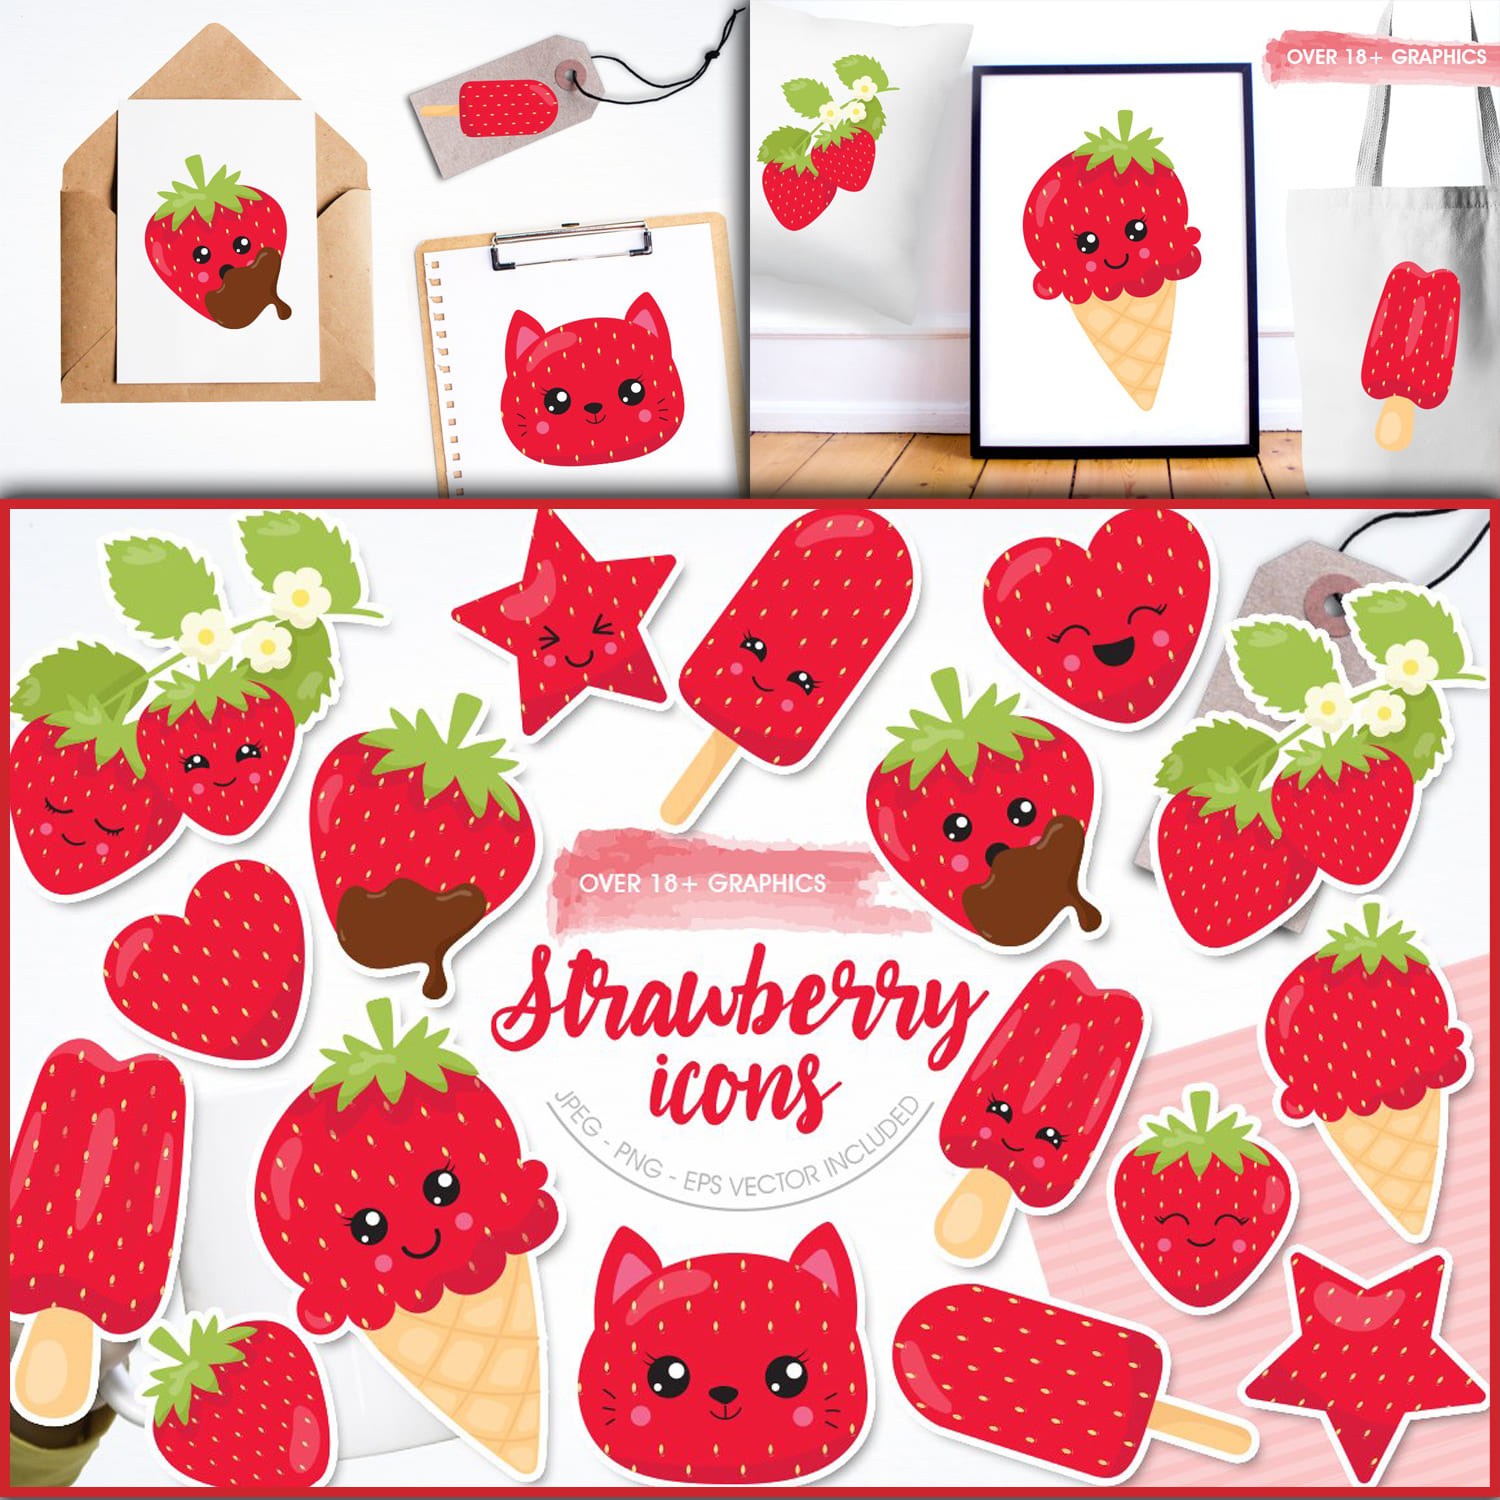 Options for using strawberry icons.